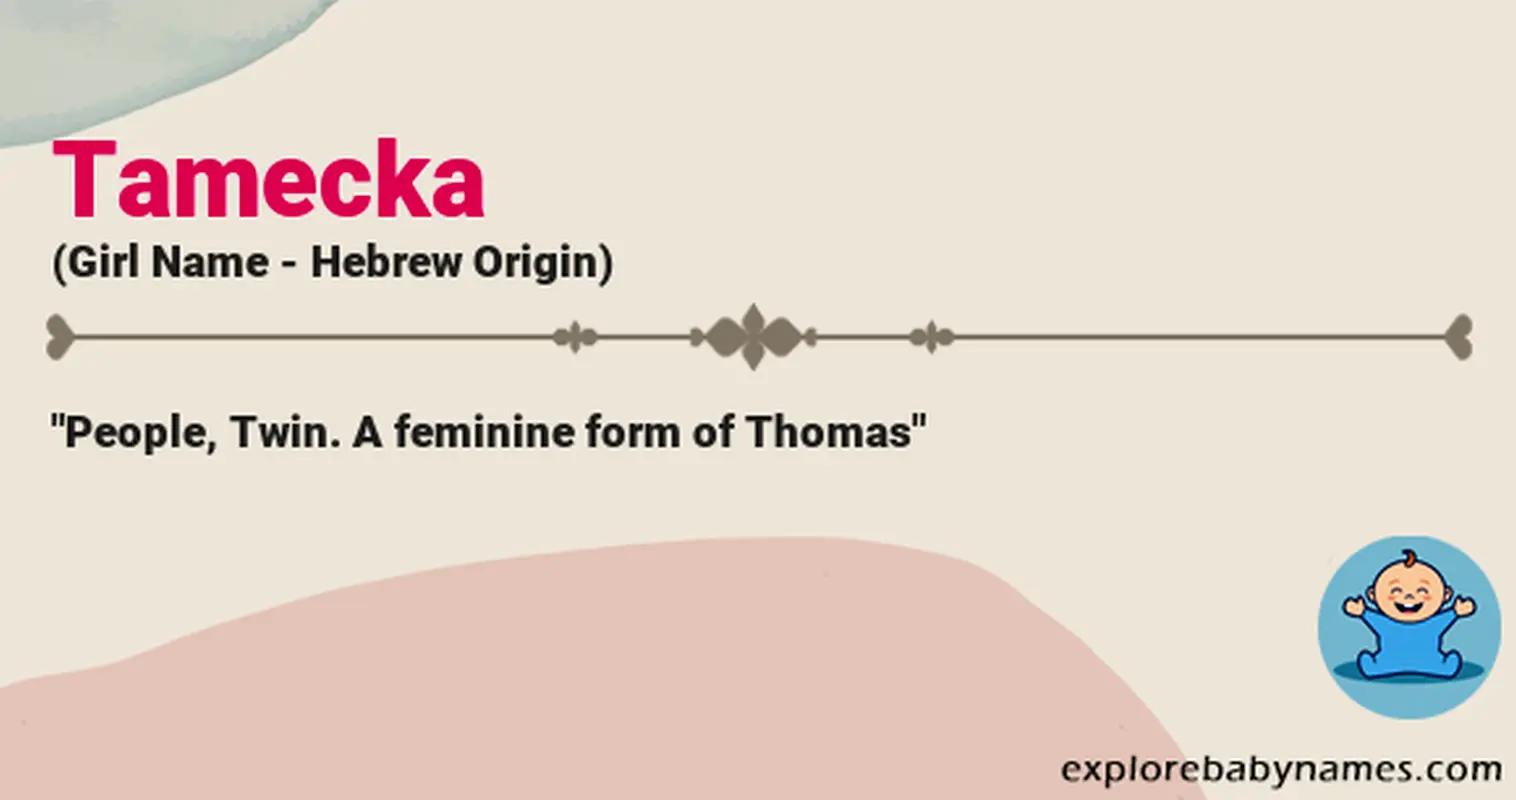 Meaning of Tamecka